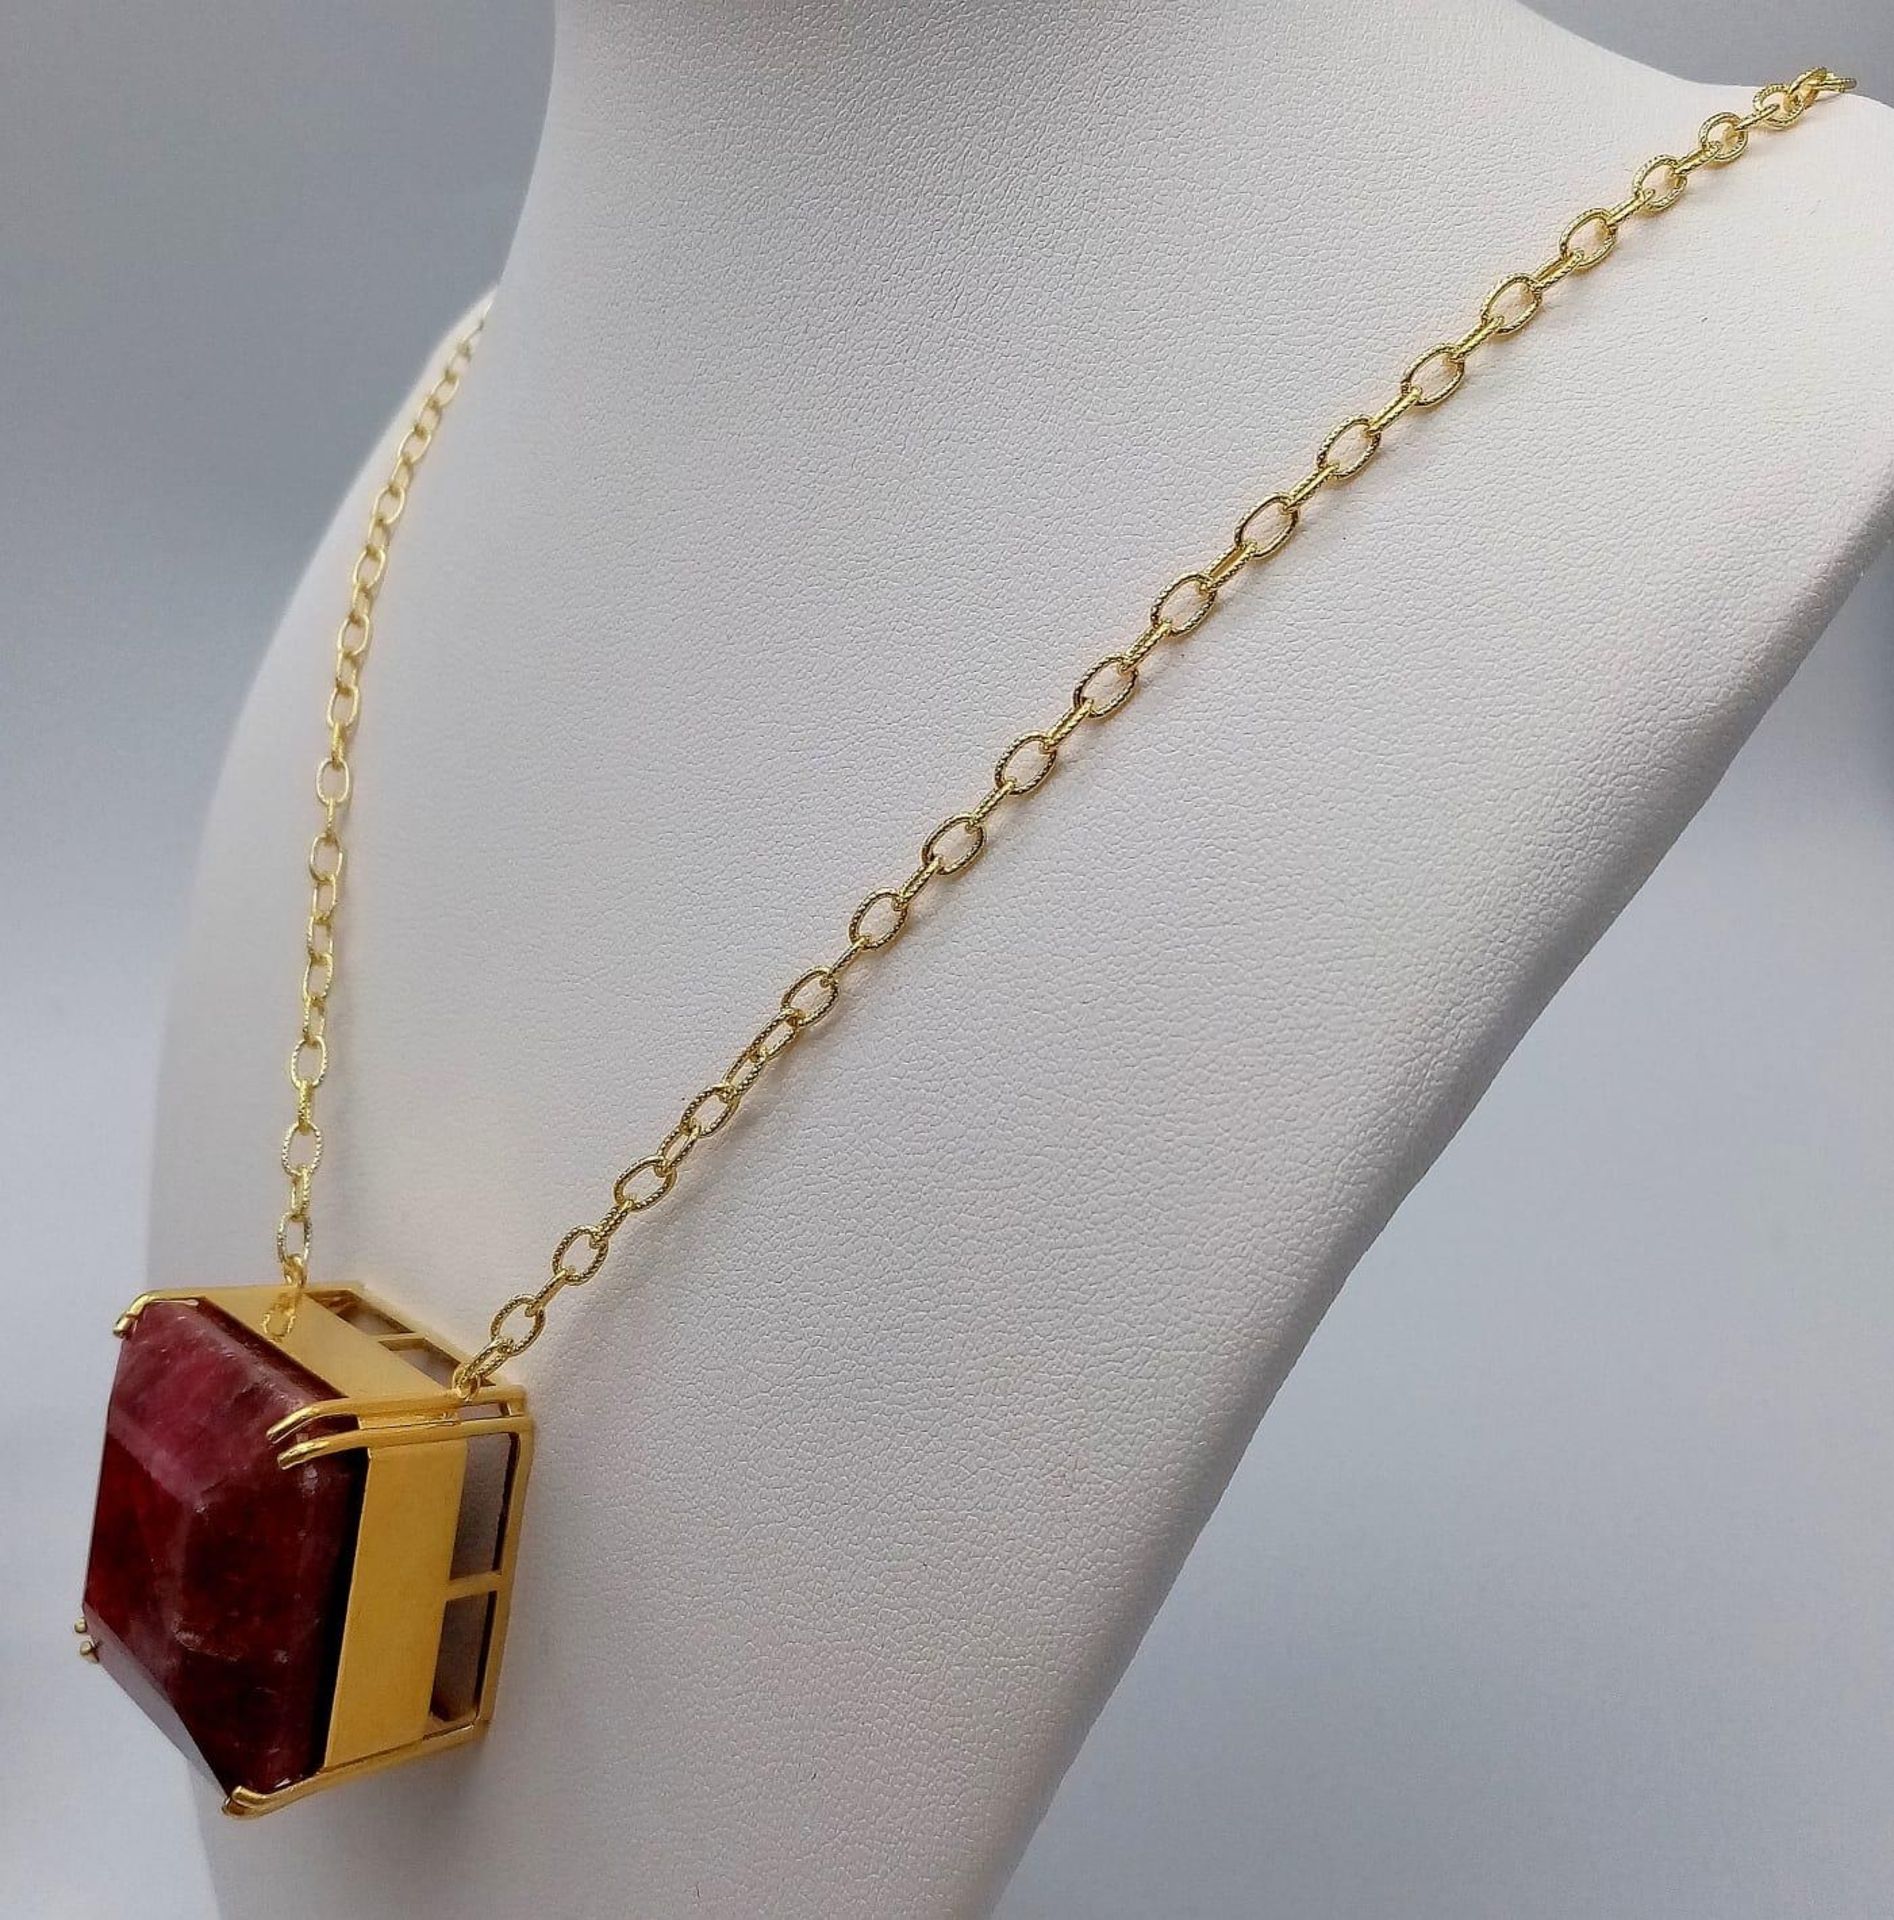 A Square-Cut 237ct Ruby Pendant in Gold Plated 925 Silver on a Gold Plated 925 Chain. Pendant 3cm - Image 6 of 9